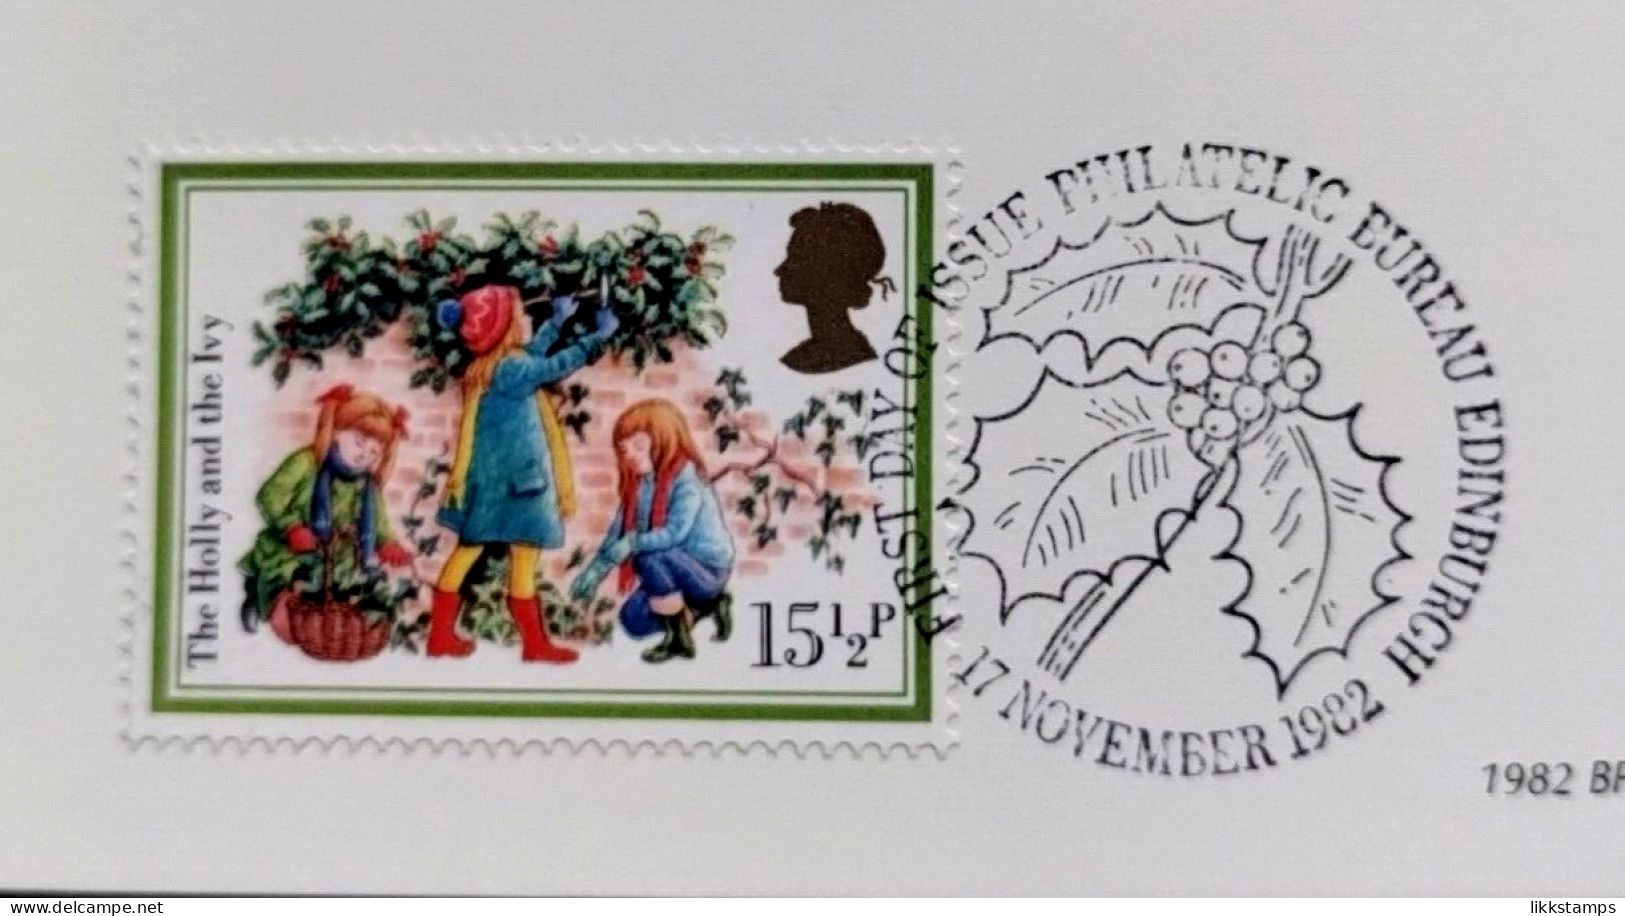 1982 'CHRISTMAS CAROLS' BENHAM SILK POSTCARDS WITH FIRST DAY OF ISSUE POSTMARKS. ( 00851 ) - Maximum Cards